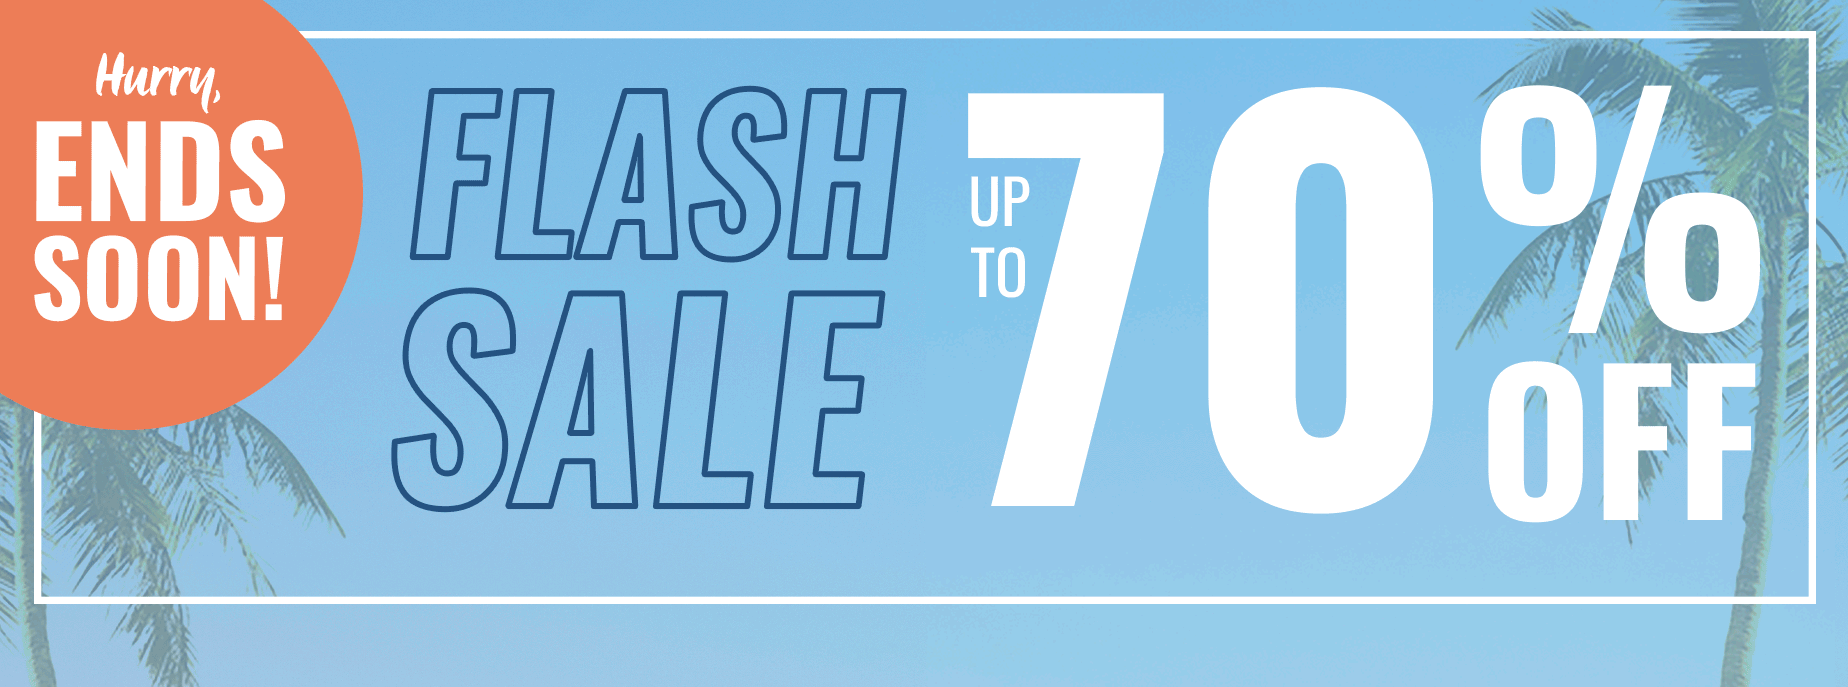 Flash Sale up to 70% off